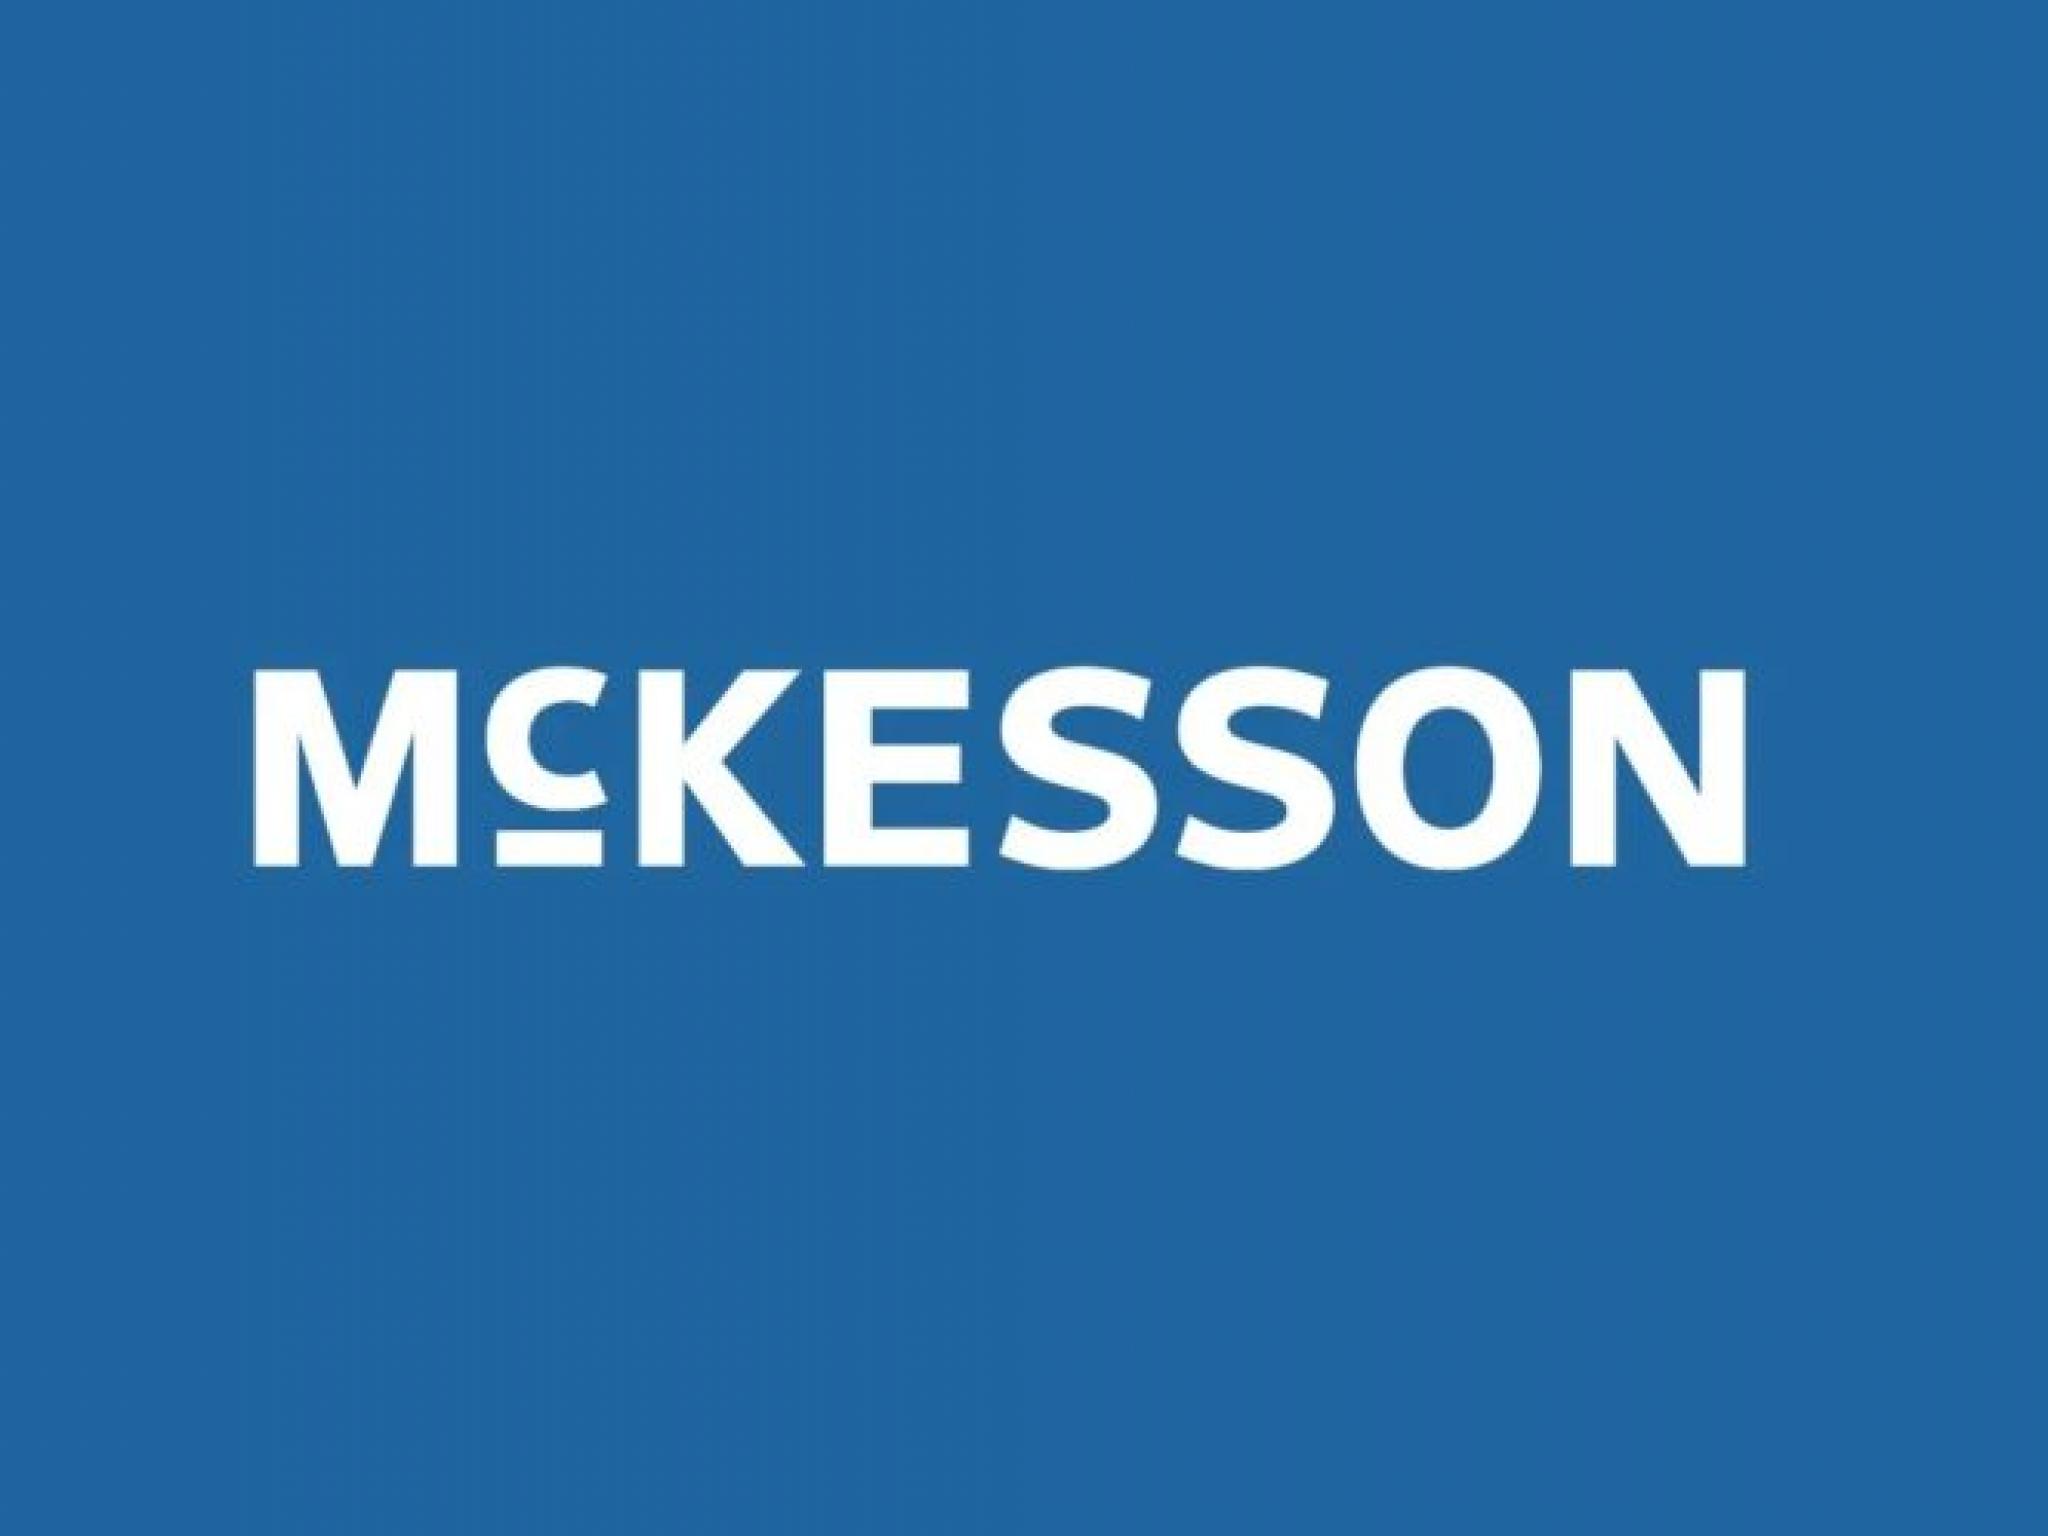  these-analysts-increase-their-forecasts-on-mckesson-following-q4-results 